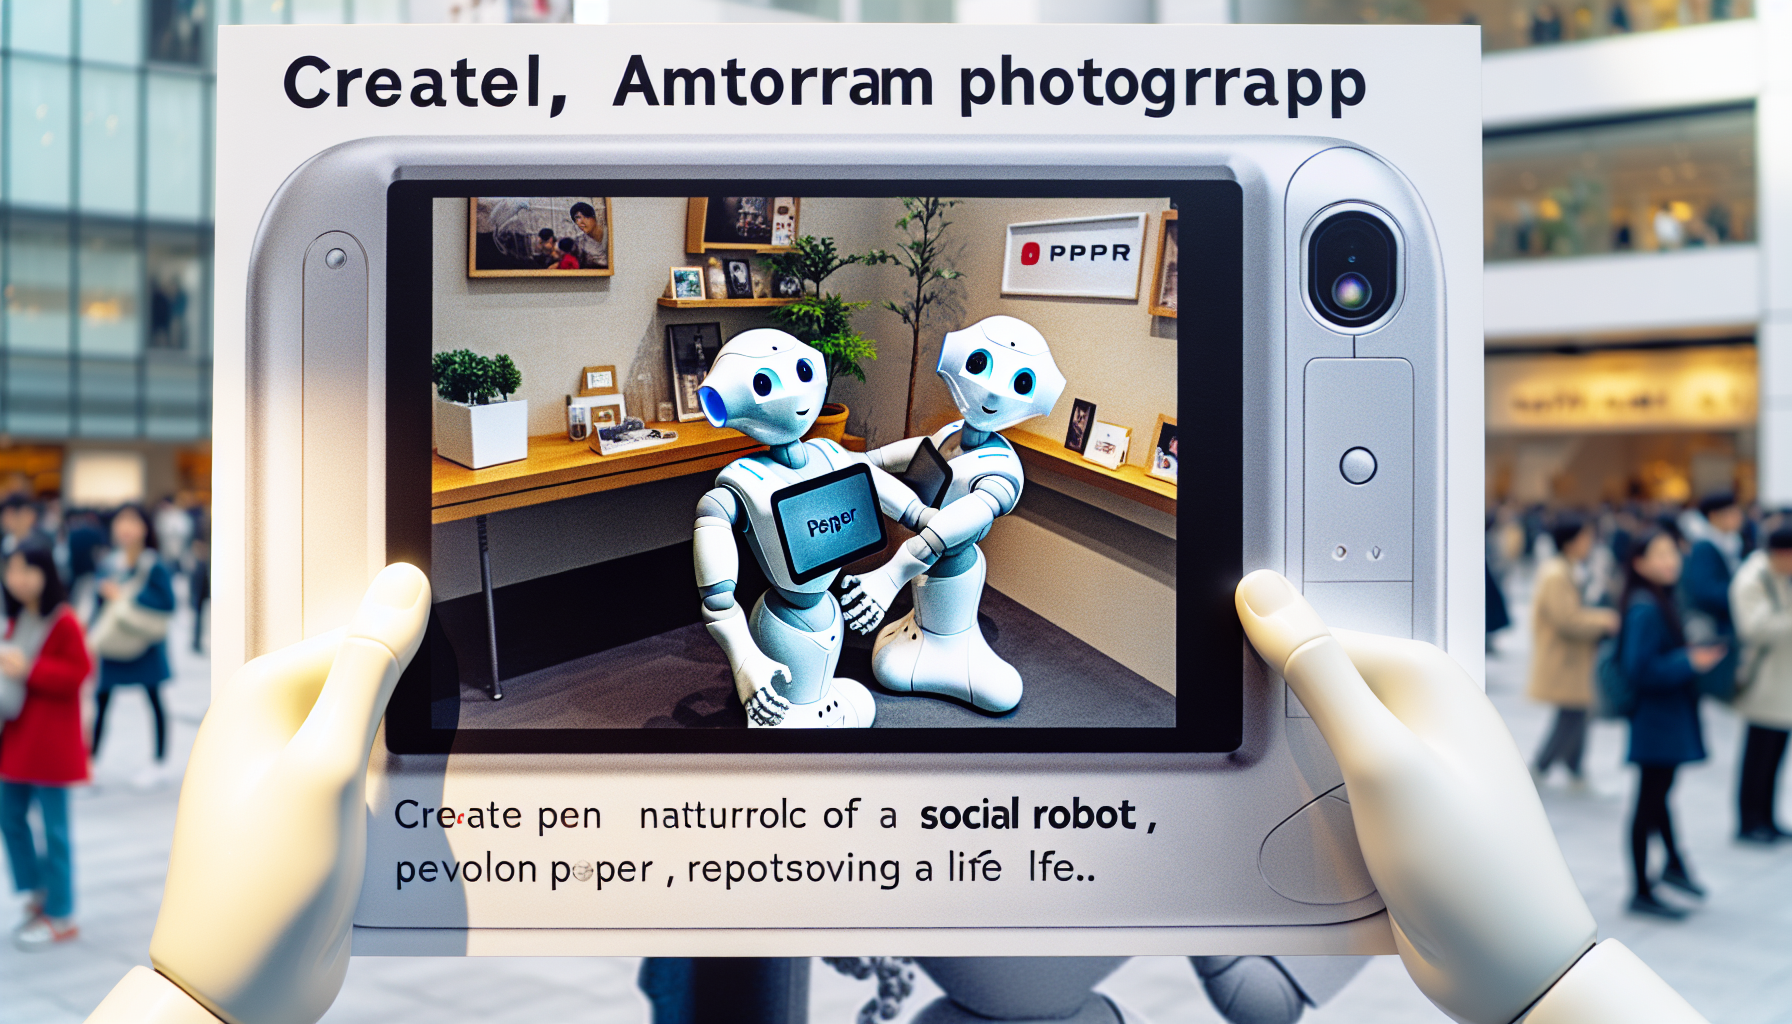 Find out everything about Pepper, Softbank's social bot, its features, usage and features, in one place.